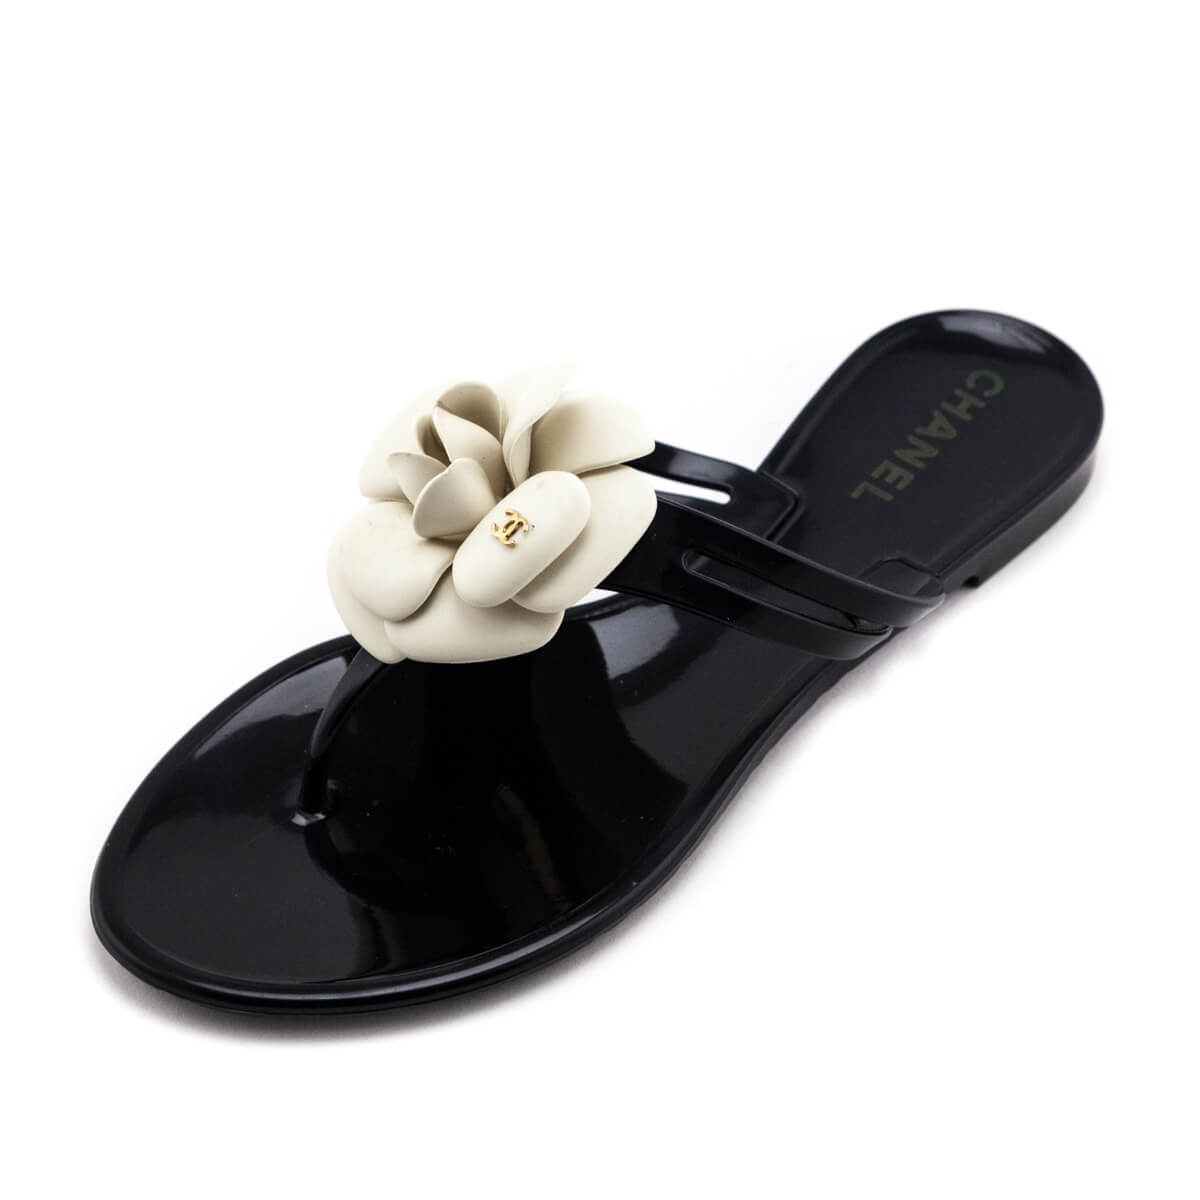 Chanel Black & Ivory Camellia Jelly Sandals - Preowned Chanel